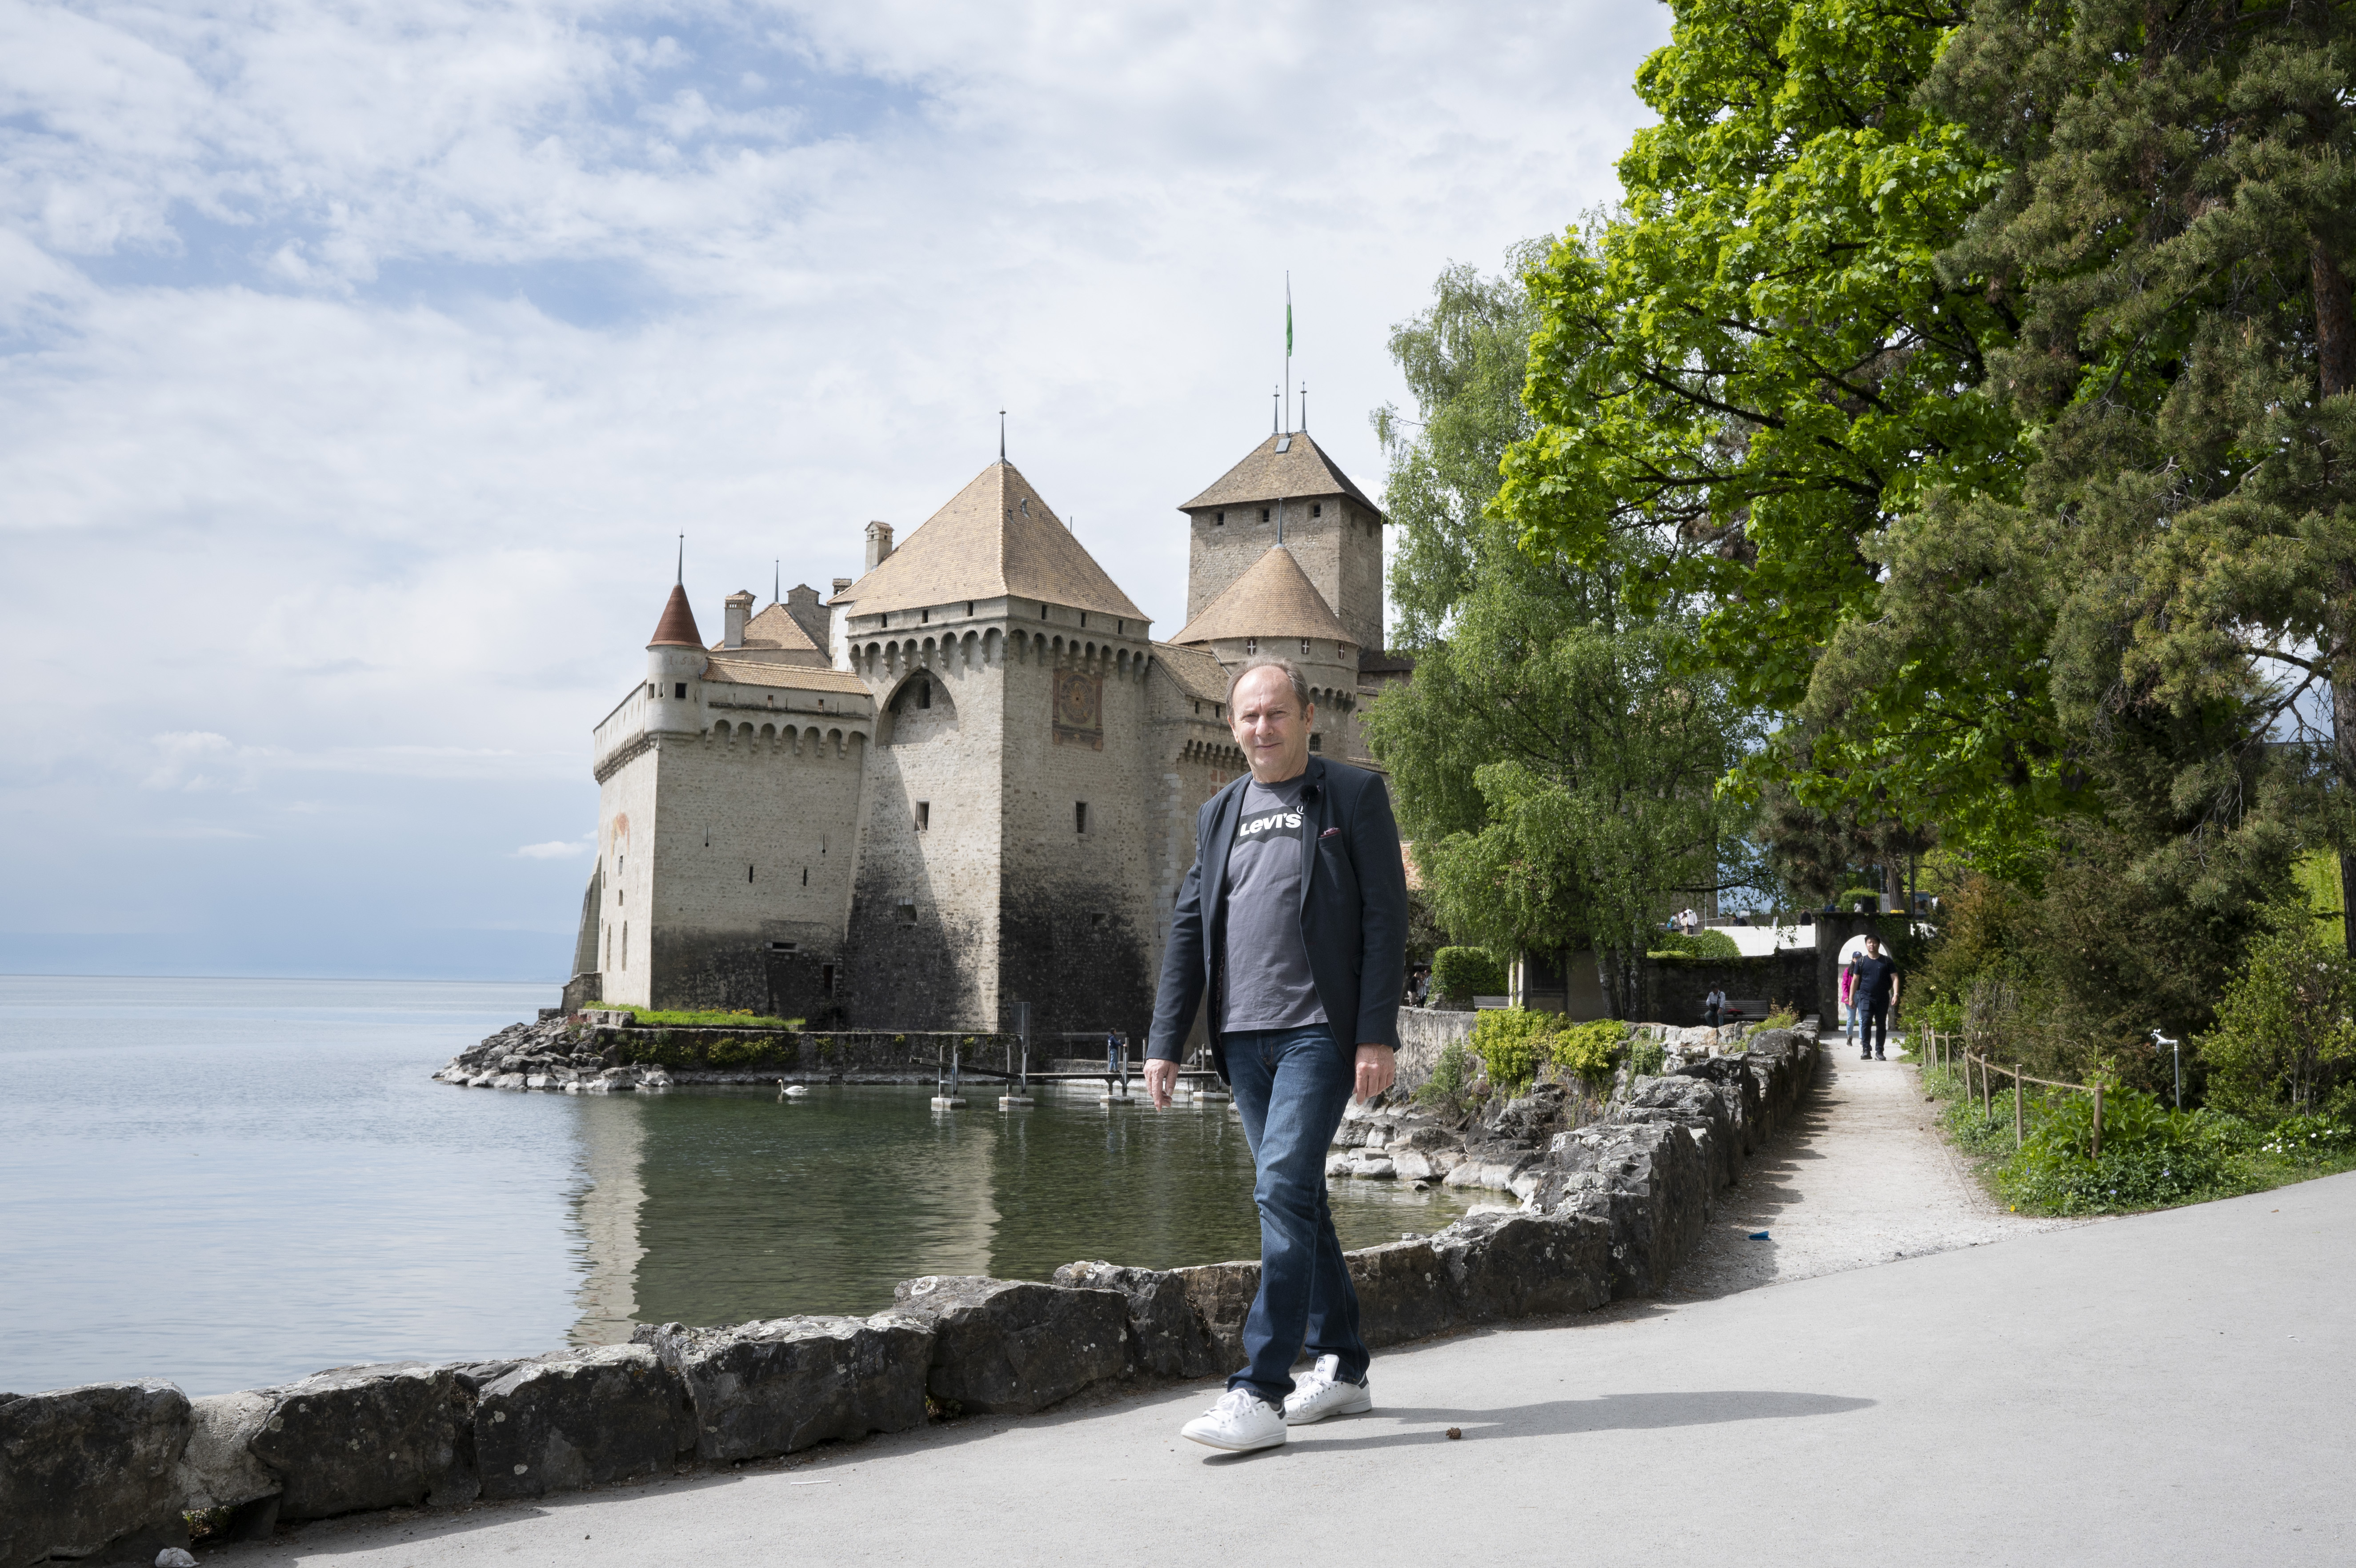 A man walking next to a body of water with a castle in the background